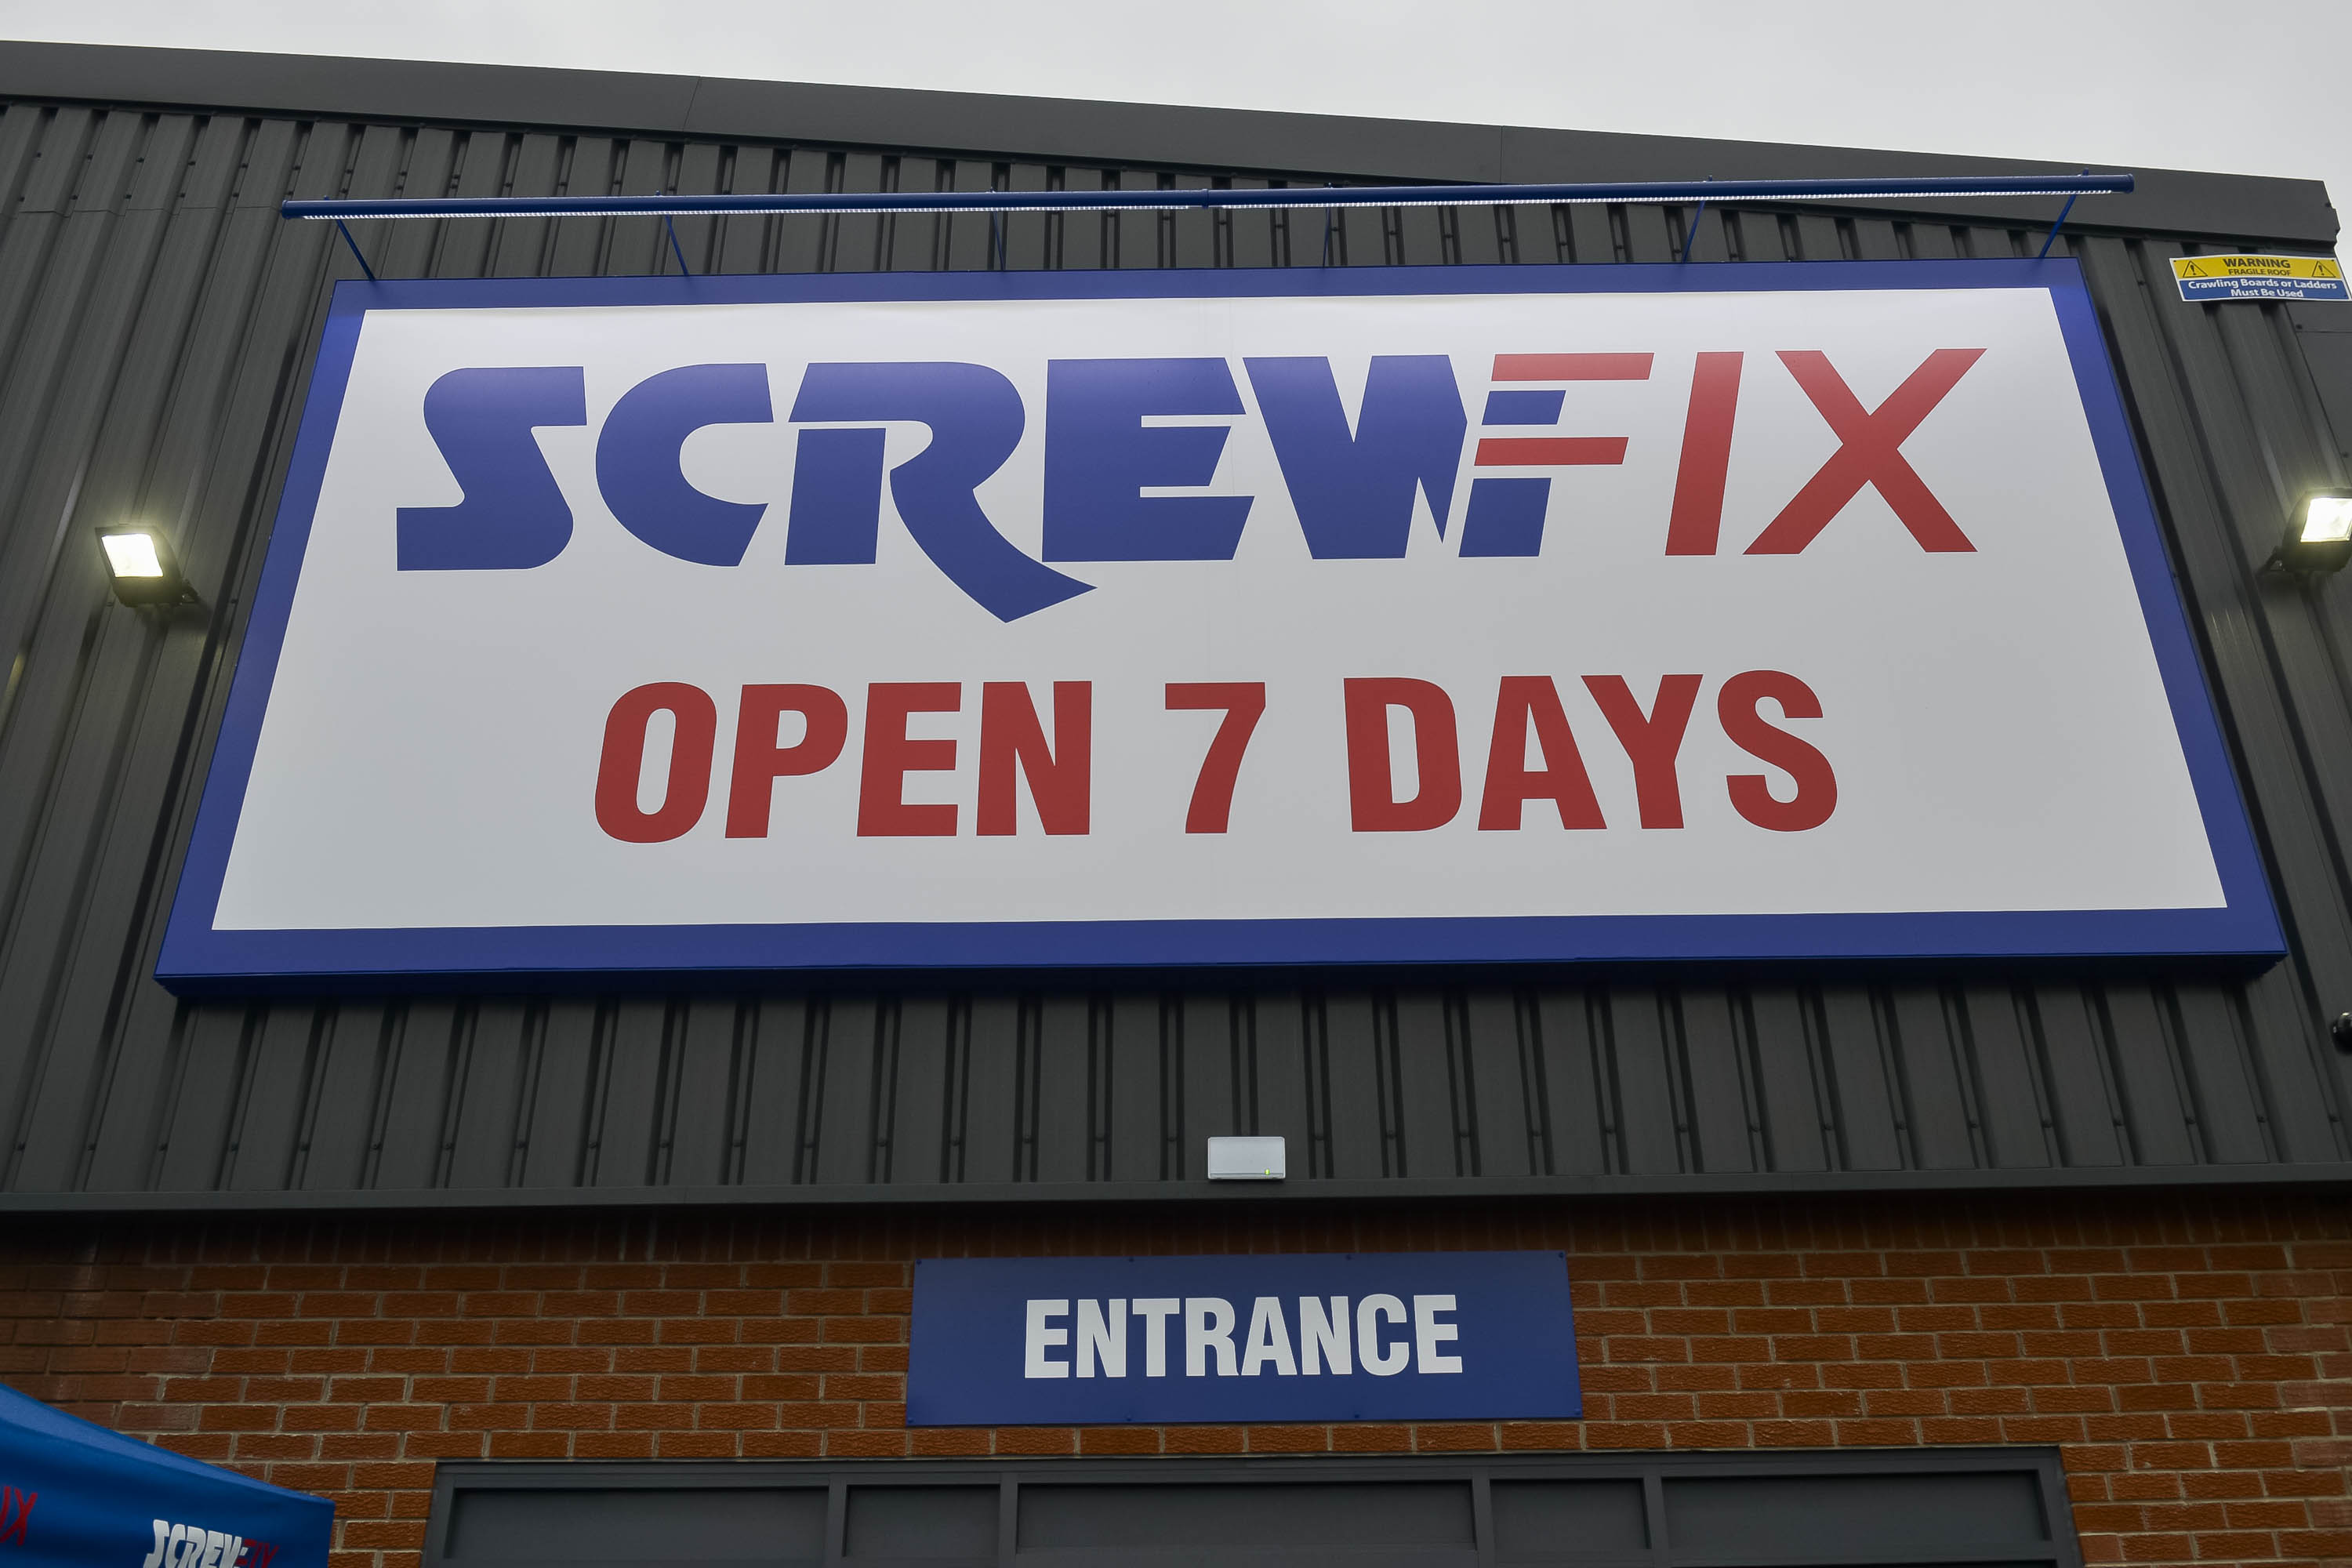 Jobs boost for Yaxley as new Screwfix store opens